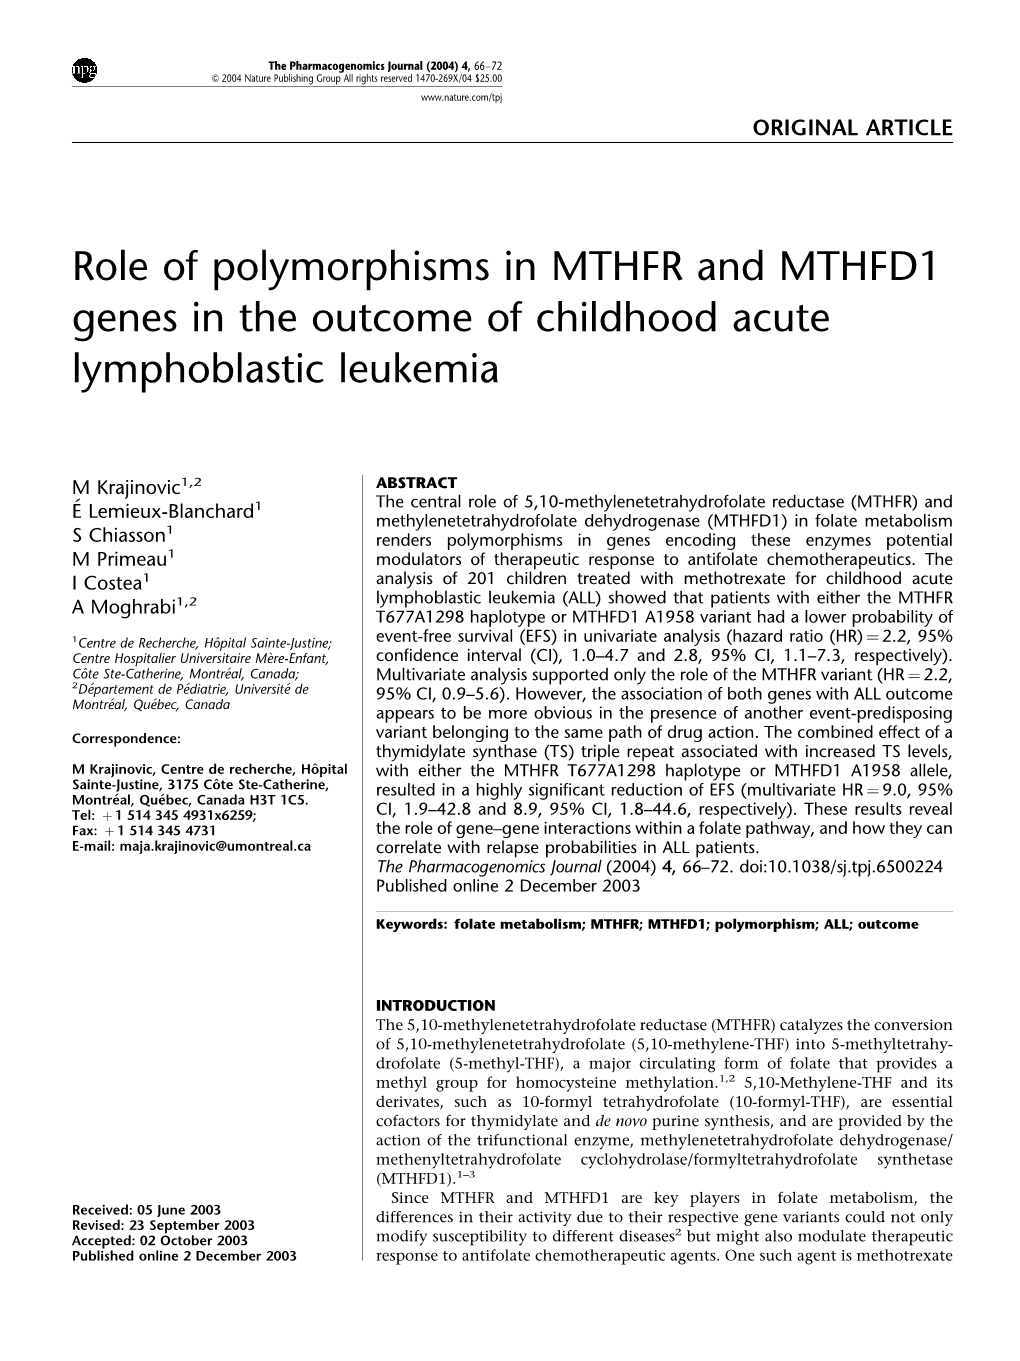 Role of Polymorphisms in MTHFR and MTHFD1 Genes in the Outcome of Childhood Acute Lymphoblastic Leukemia